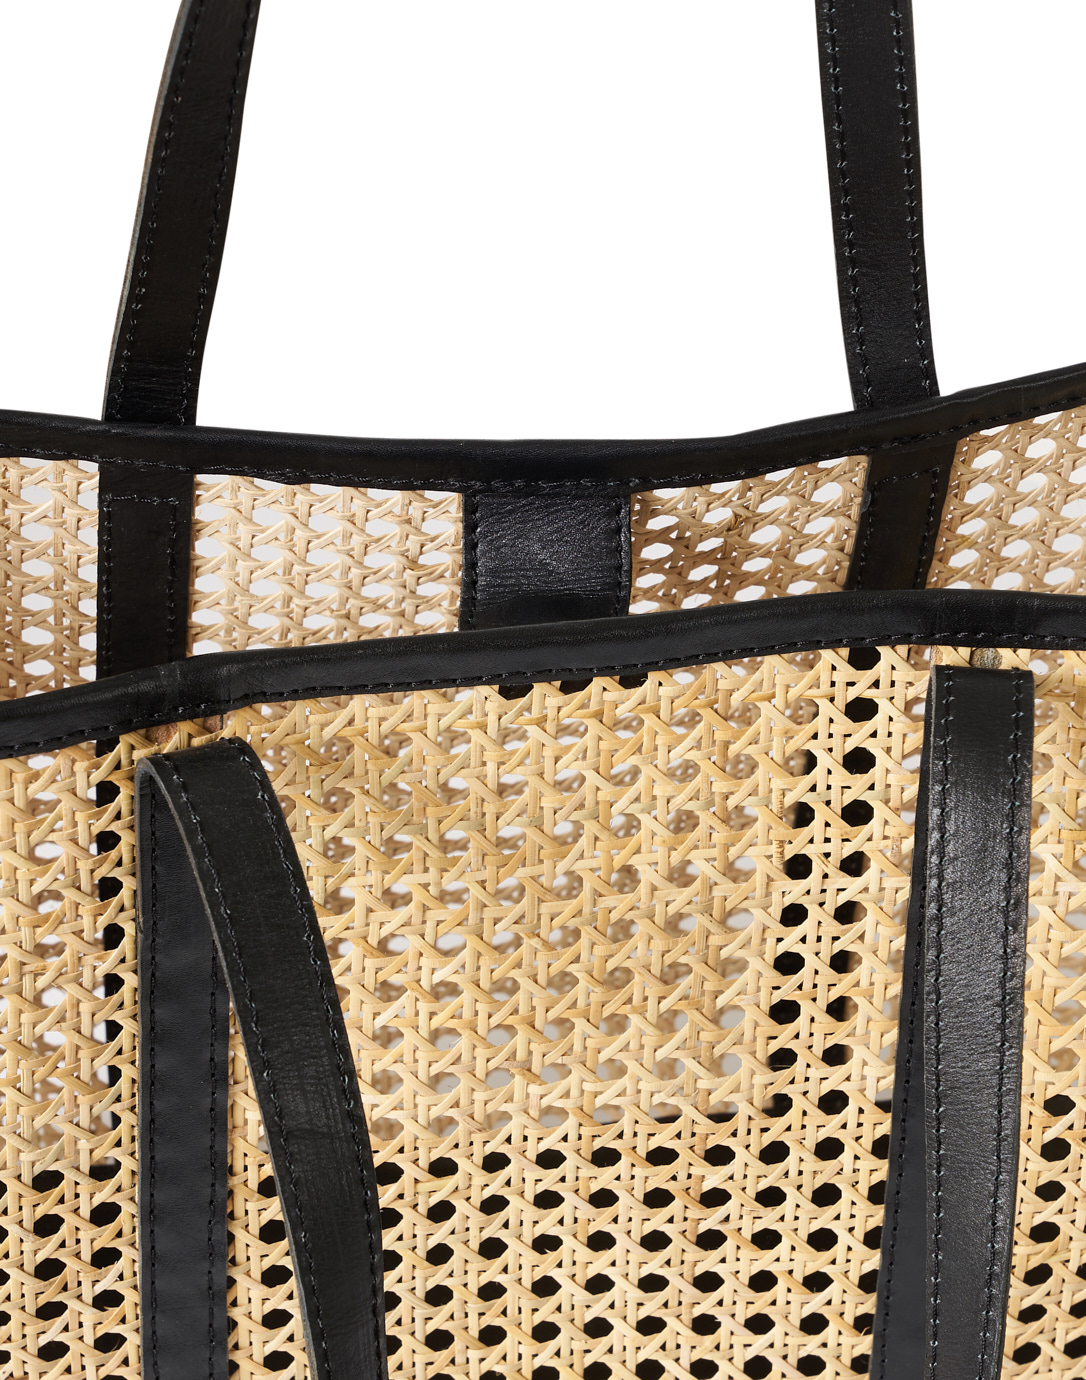 Black Rattan and Leather Tote Shoulder Bag for Women – The Artisan